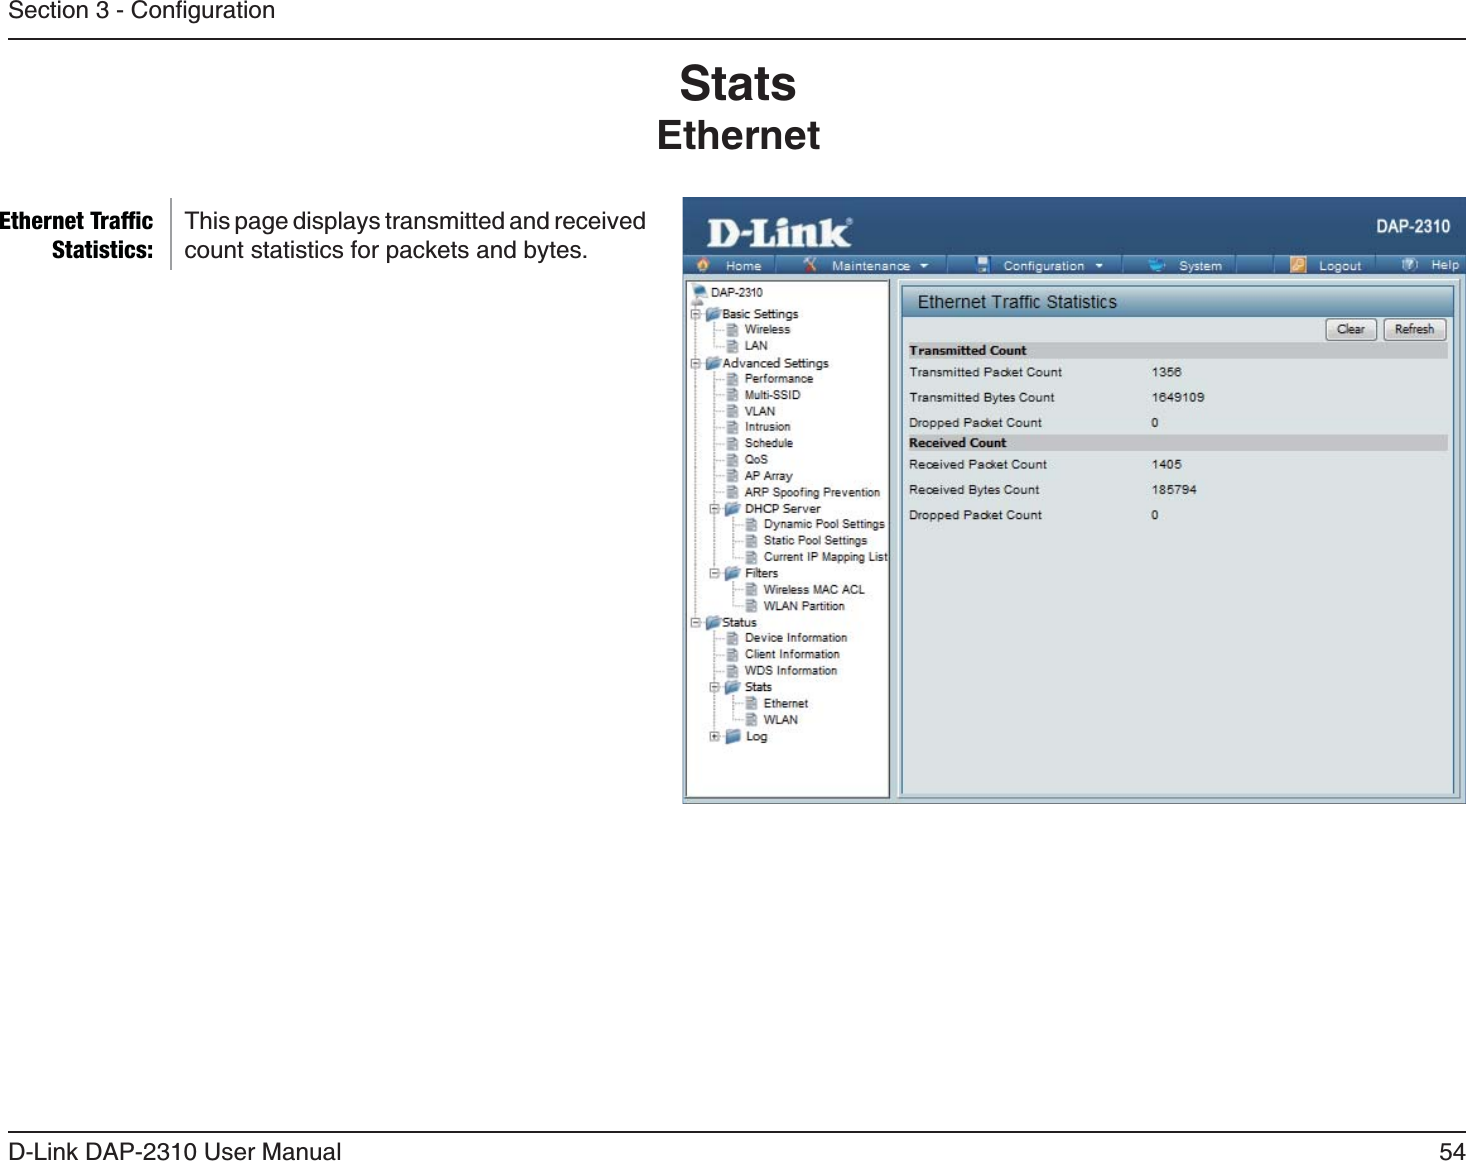 54D-Link DAP-2310 User ManualStatsEthernetThis page displays transmitted and received count statistics for packets and bytes.Ethernet Trafﬁc Statistics: